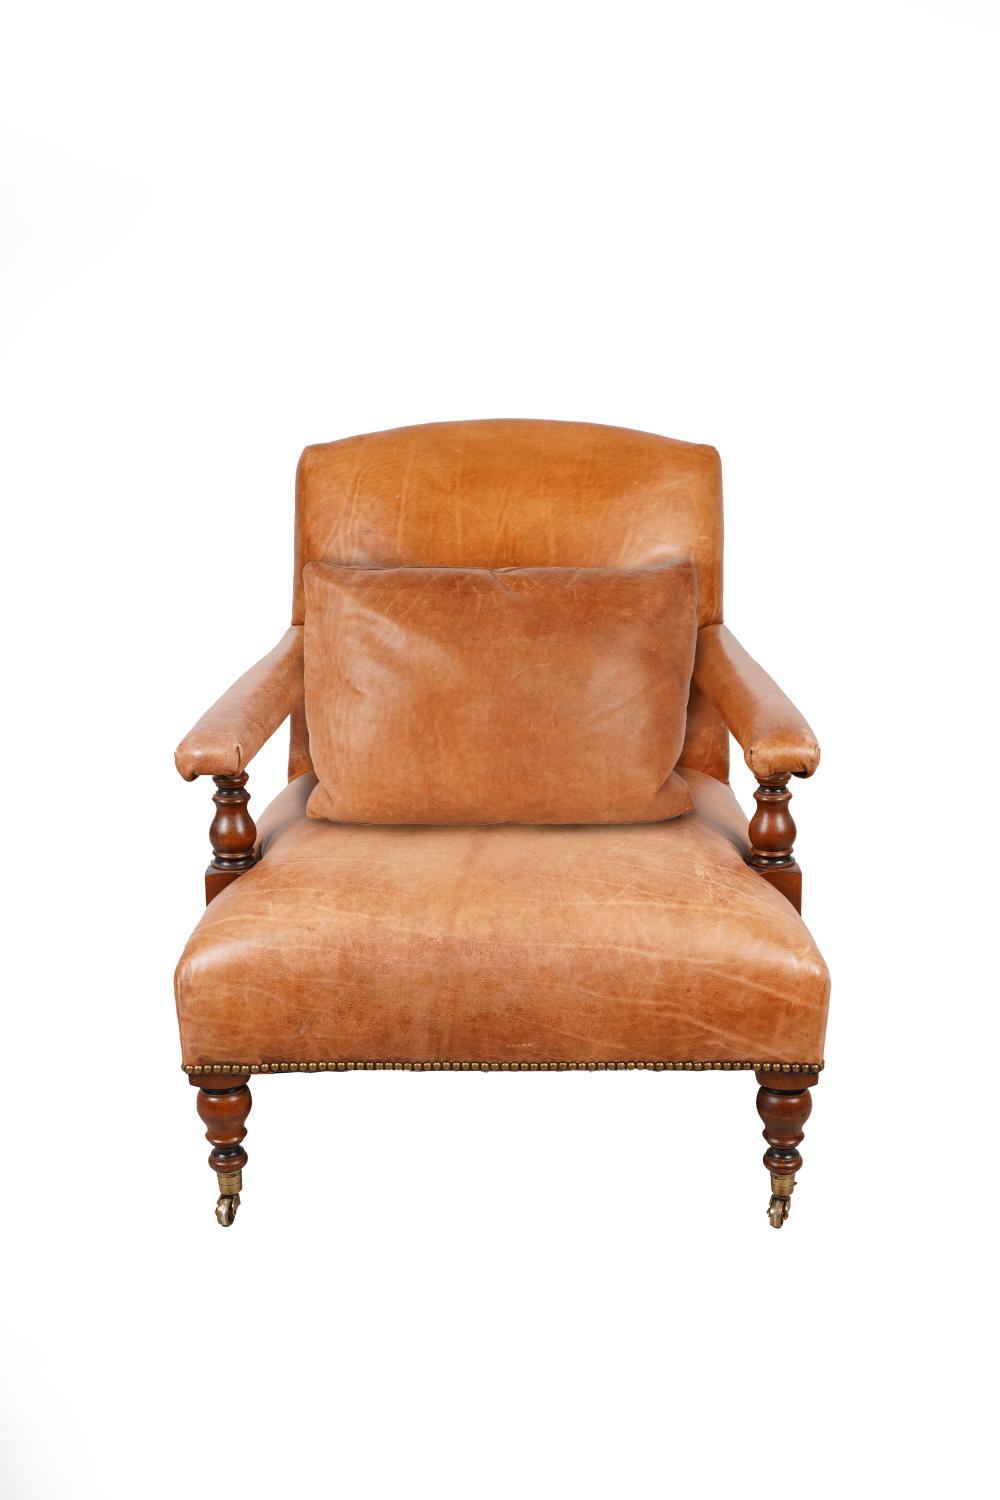 RALPH LAUREN "OLIVER" LEATHER ARMCHAIRwith